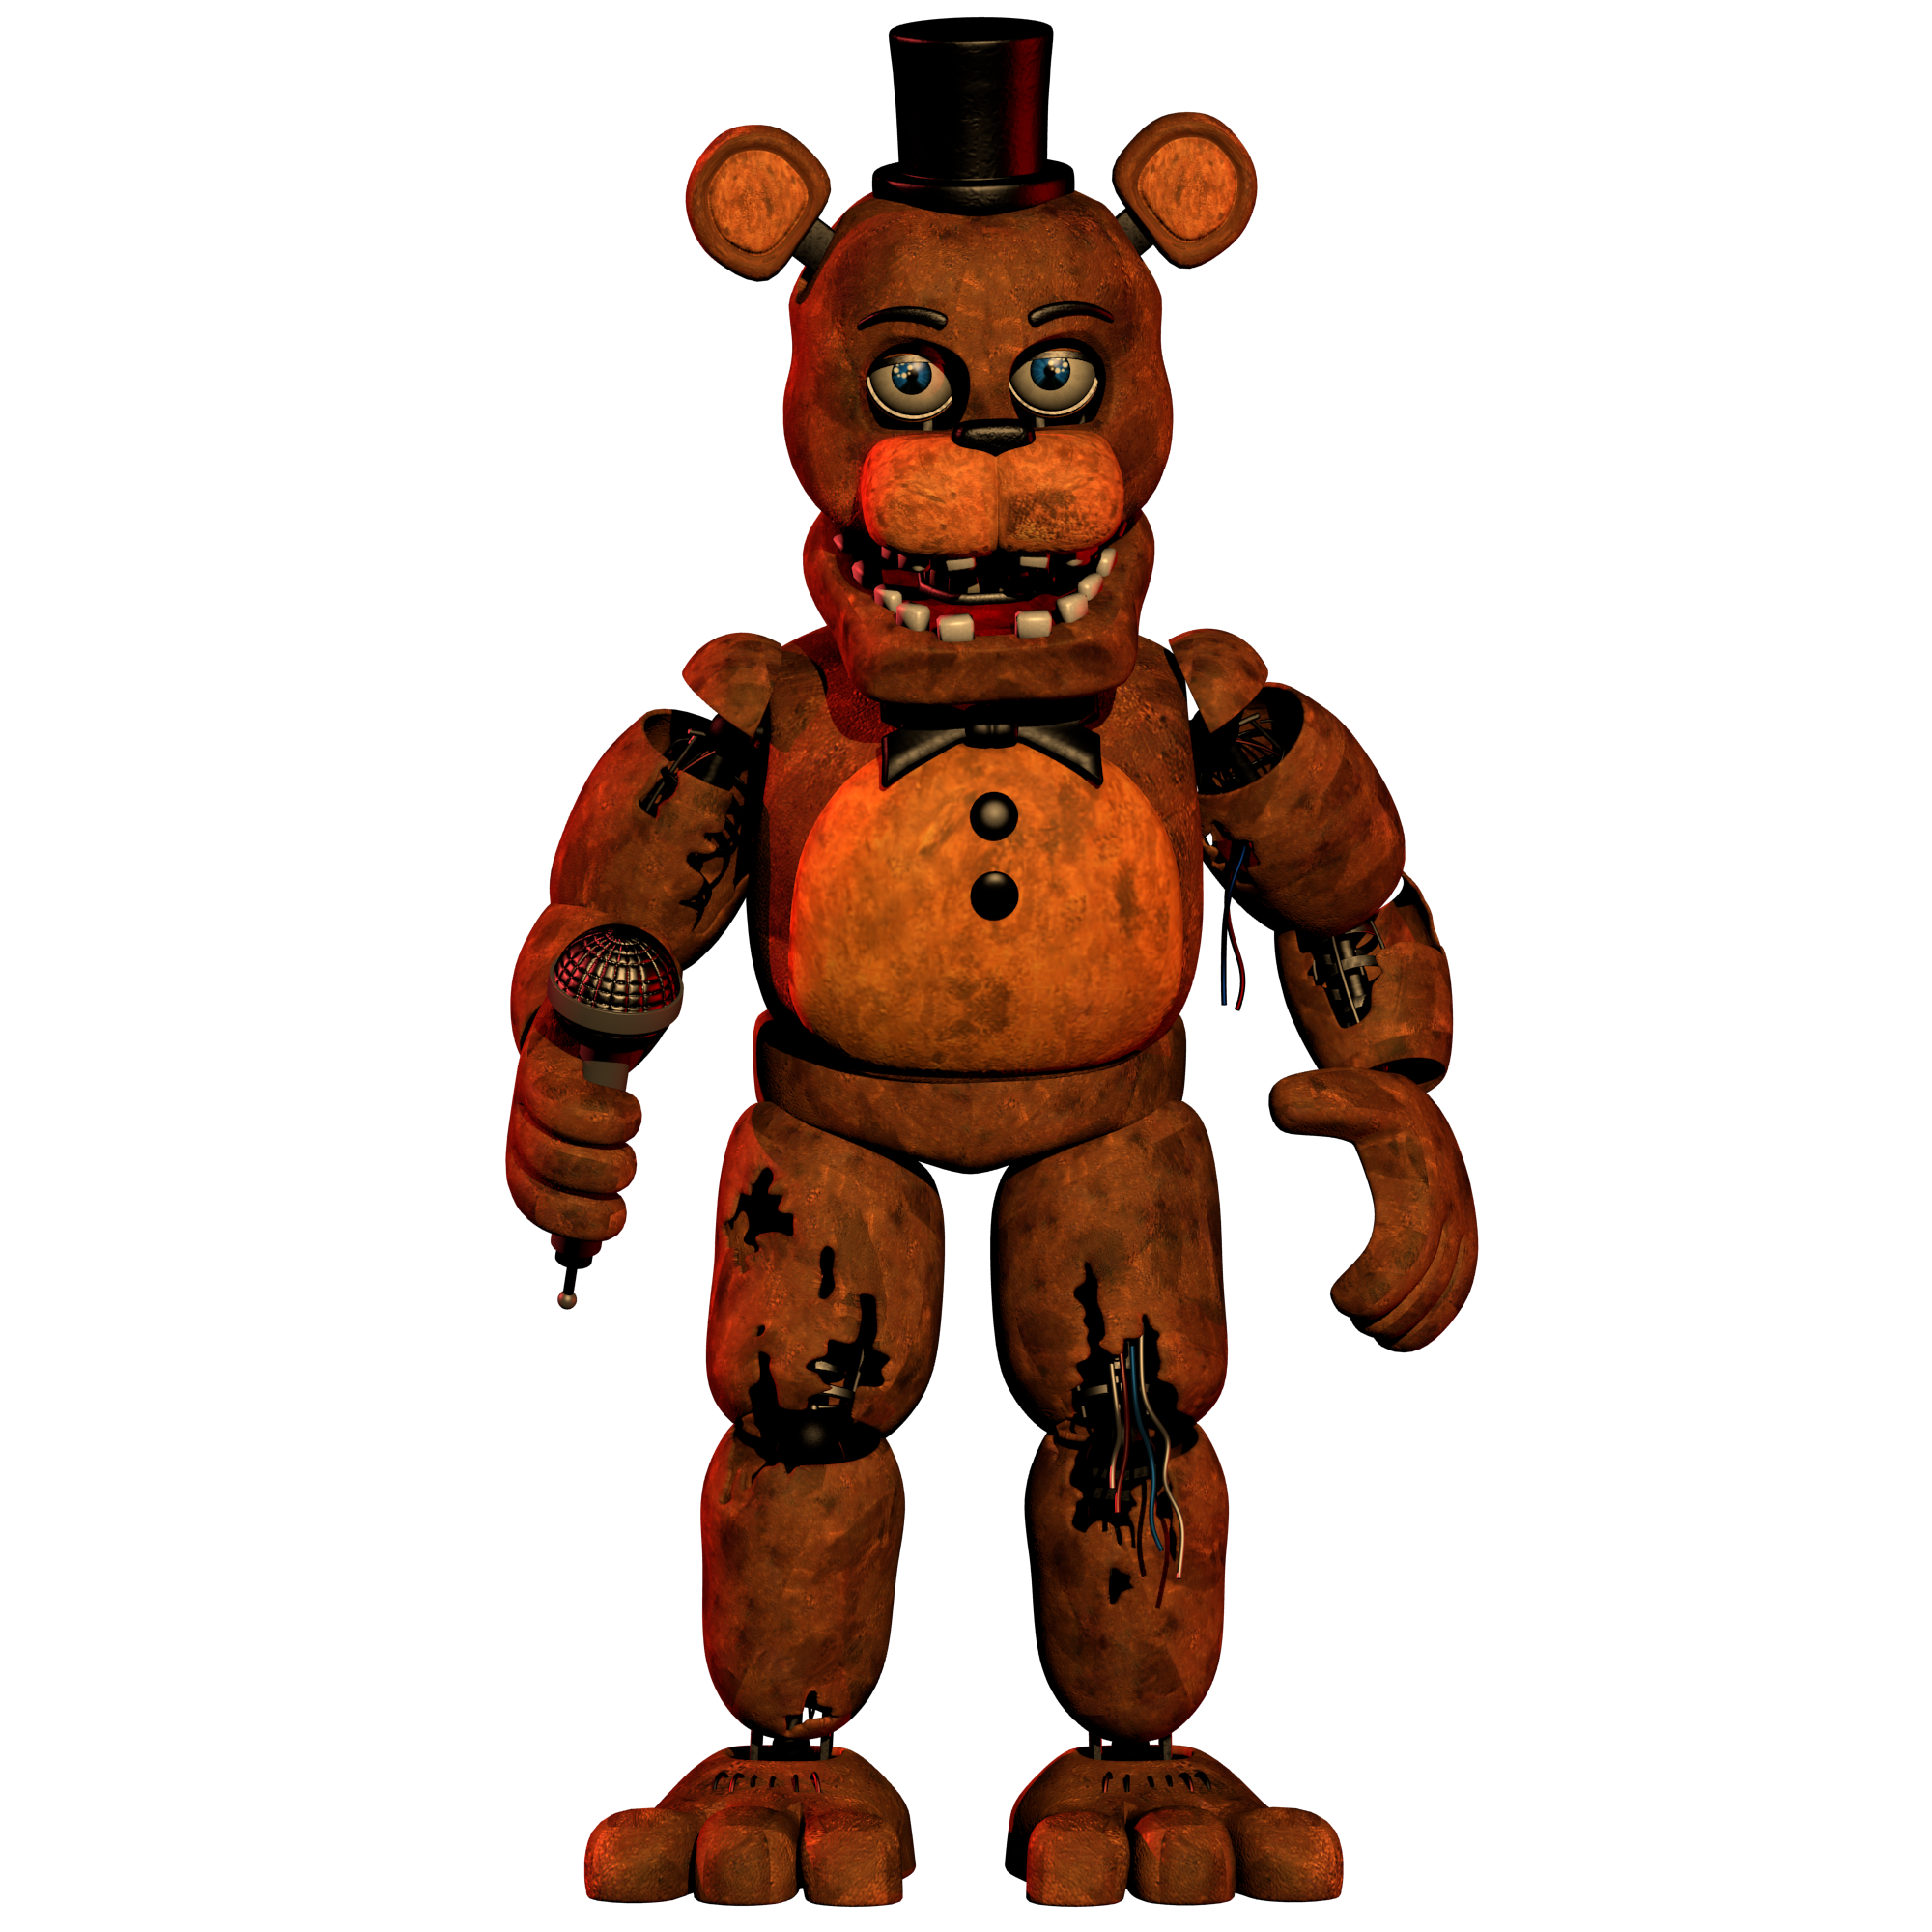 Withered Freddy Updated [DOWNLOAD] by CoolioArt on DeviantArt